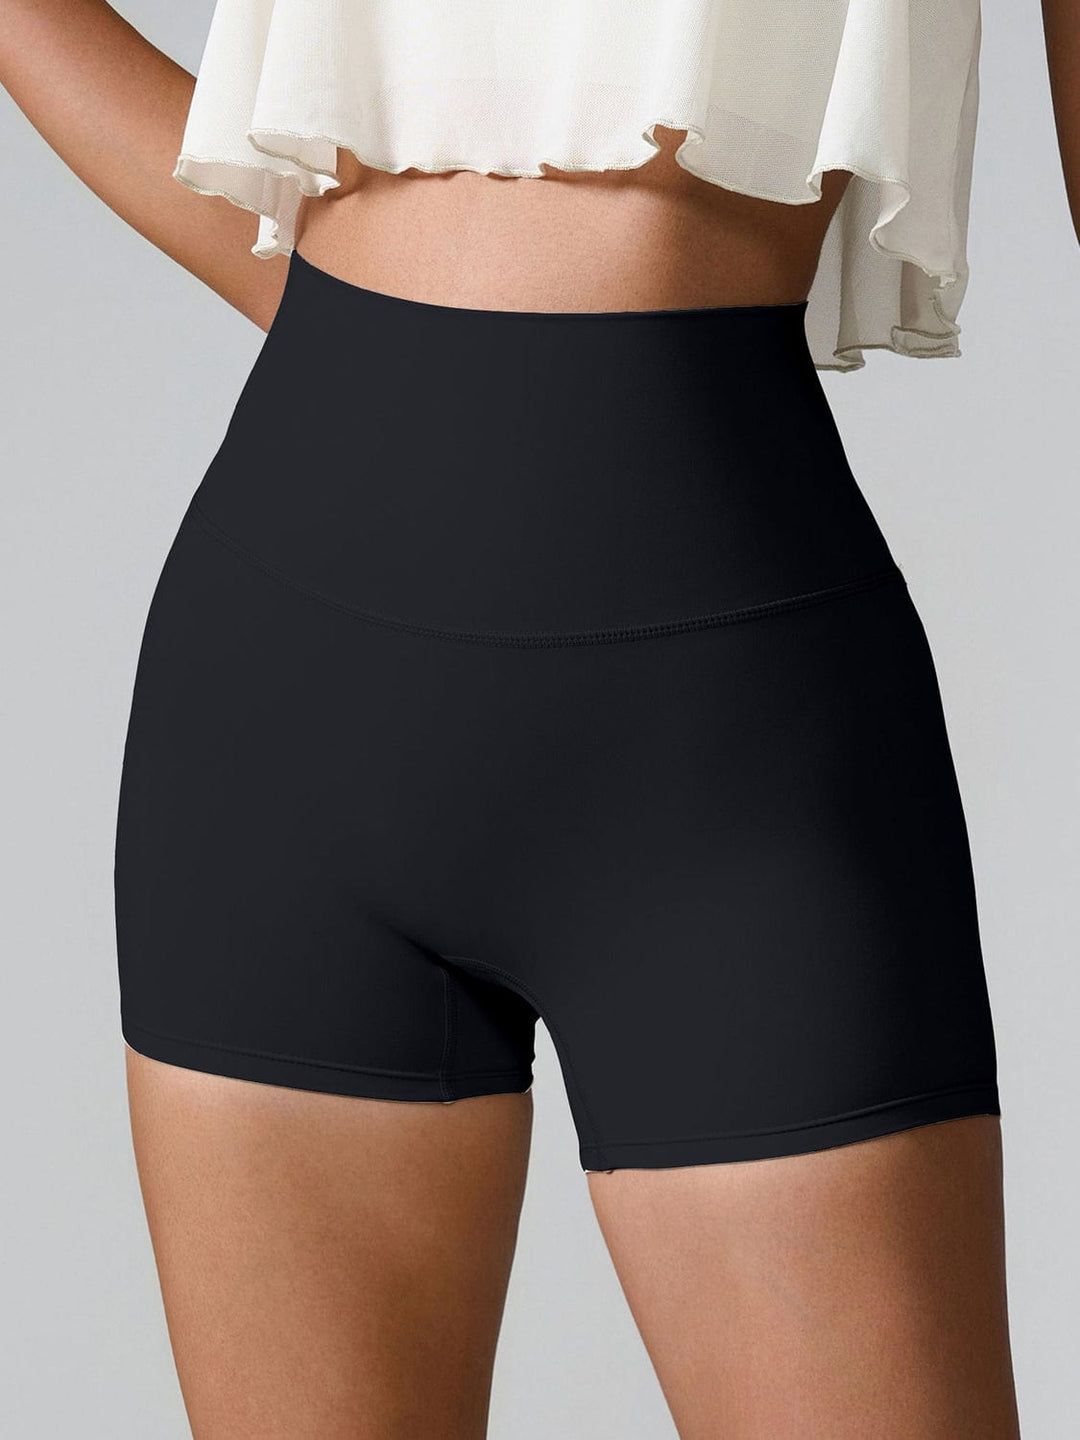 The802Gypsy Activewear/bottoms Black / S GYPSY-High Waist Active Shorts